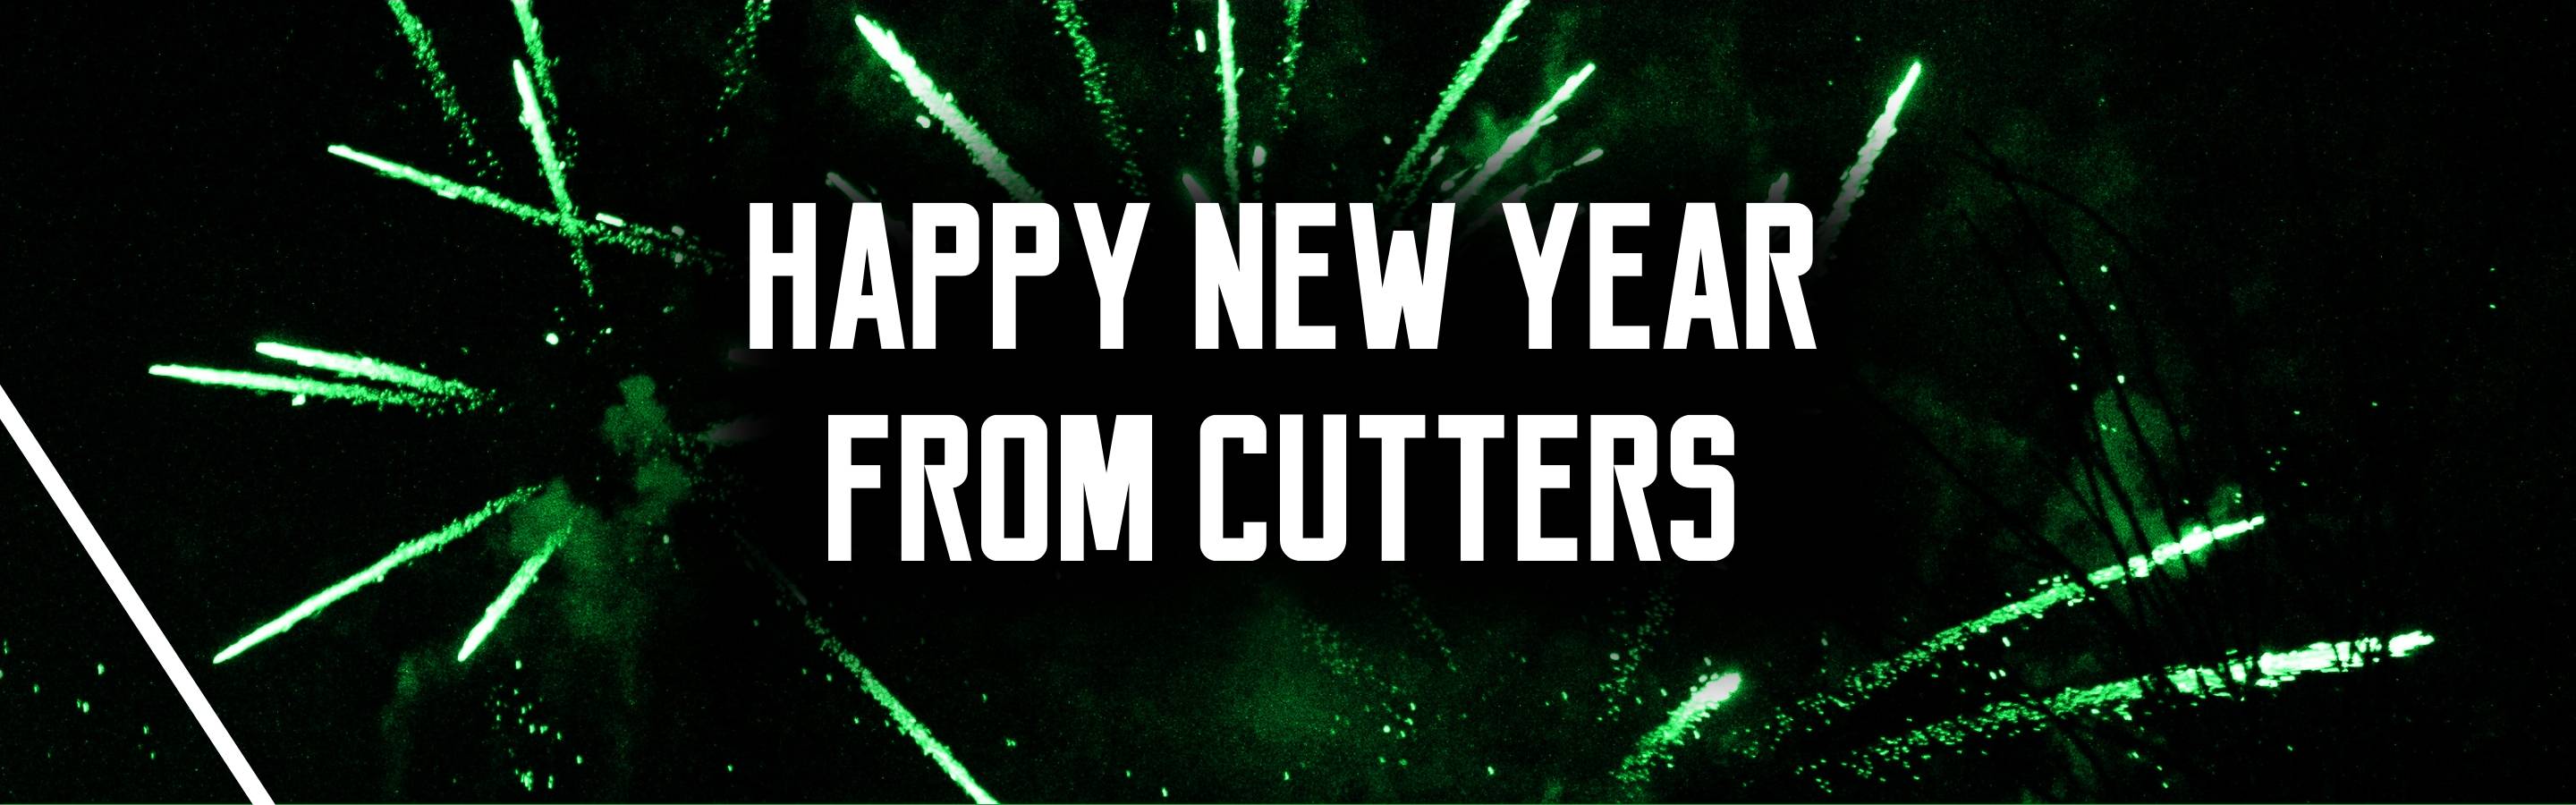 Happy New Year from Cutters